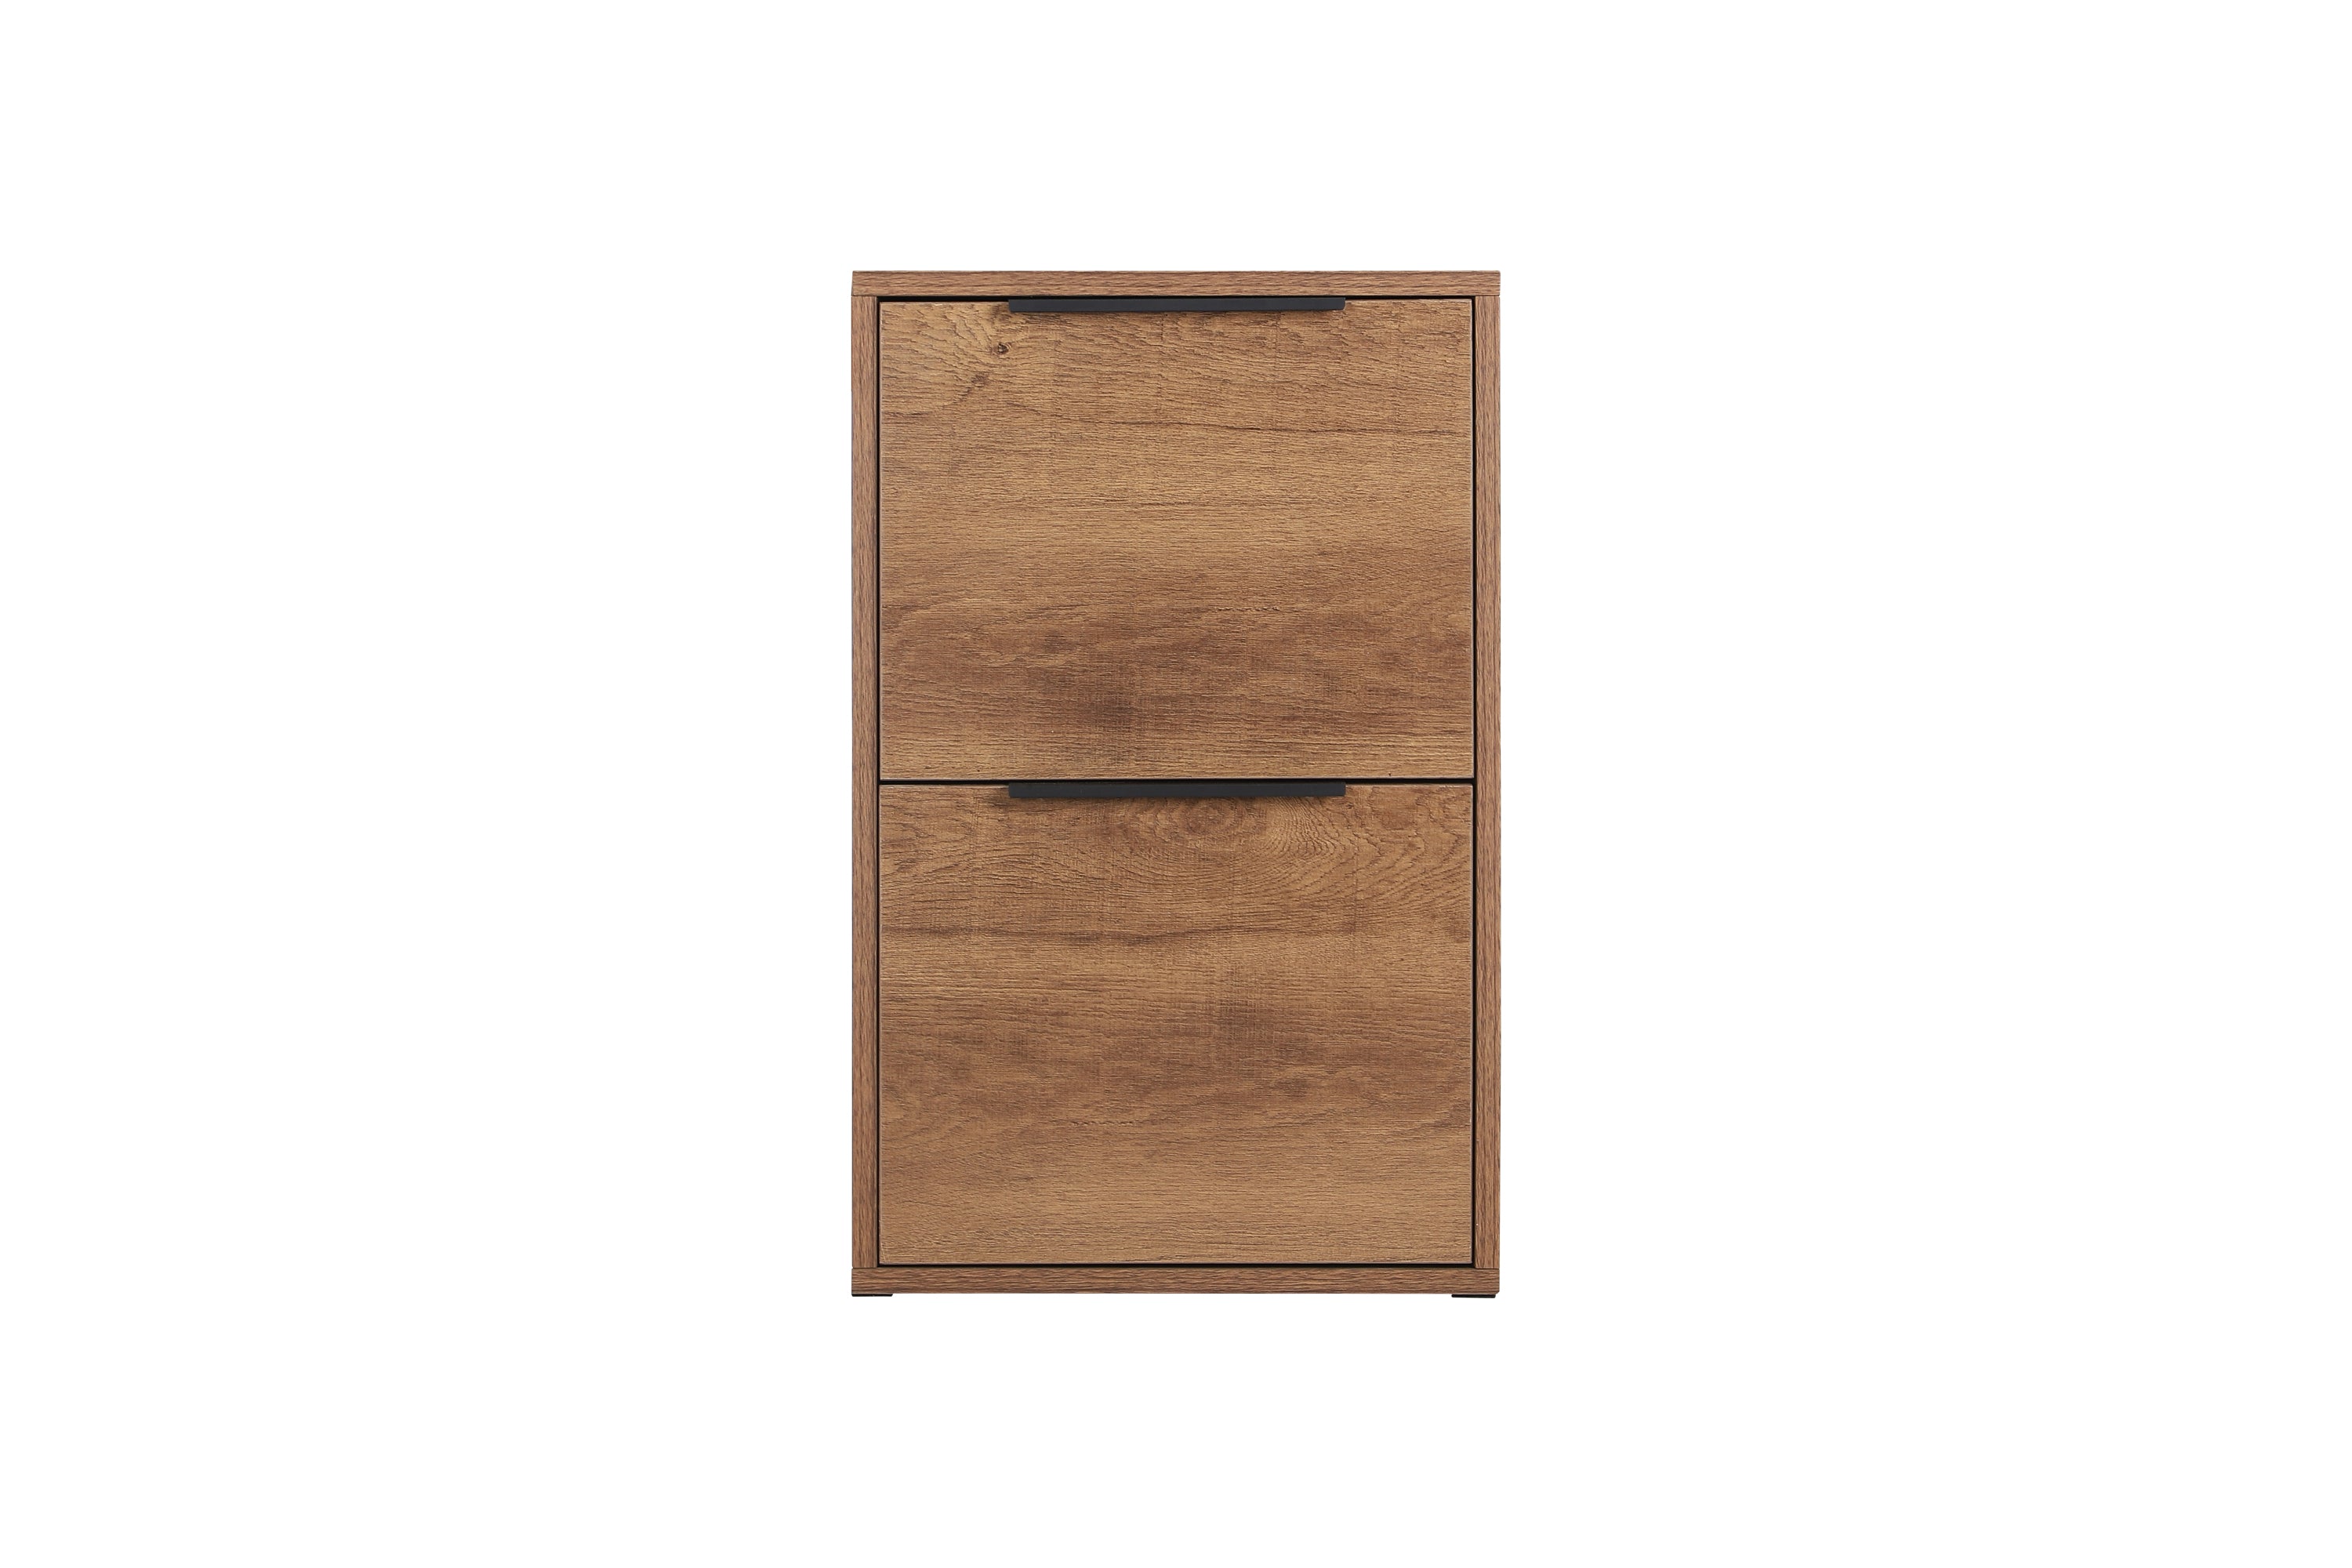 WOOD FILE CABINET WITH 2 DRAWERS VERTICAL FILLING CABINET